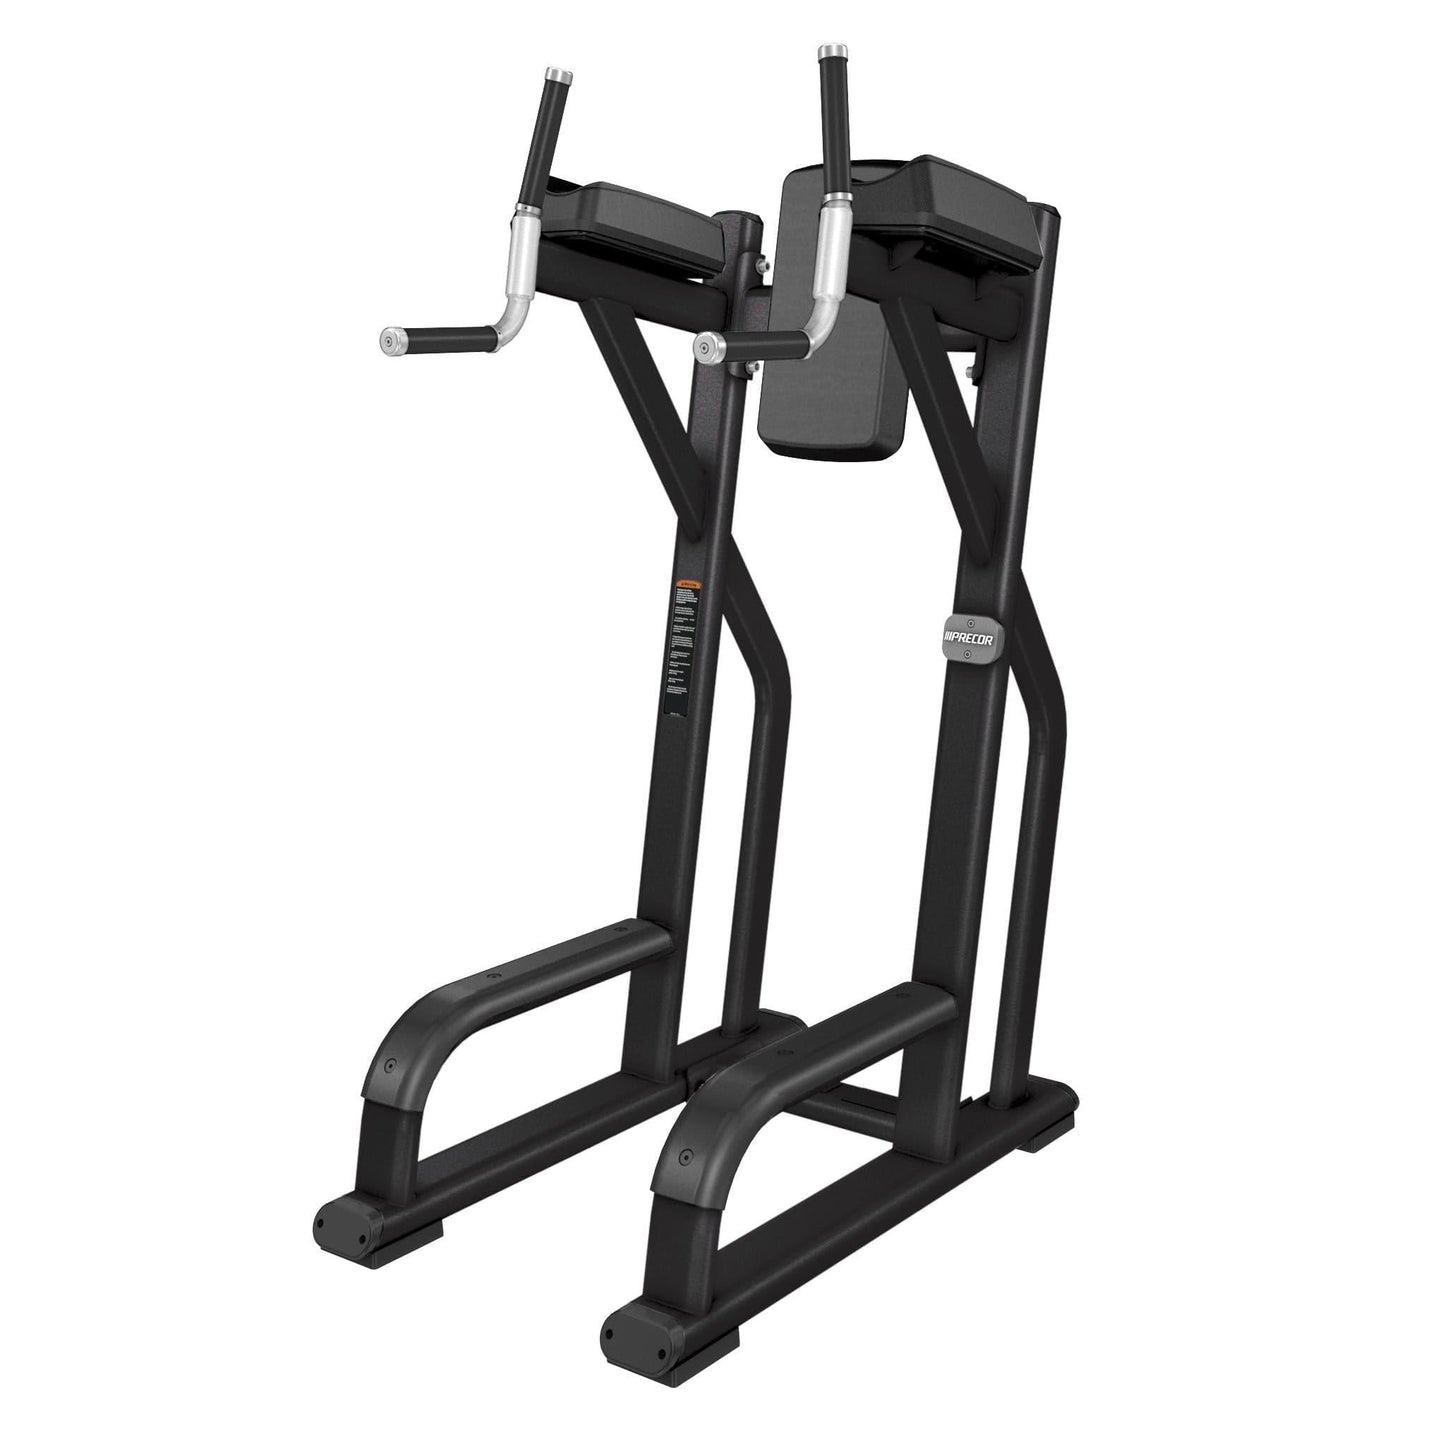 Precor Discovery Series Vertical Knee Up (DBR0702) Weight Bench Precor Black